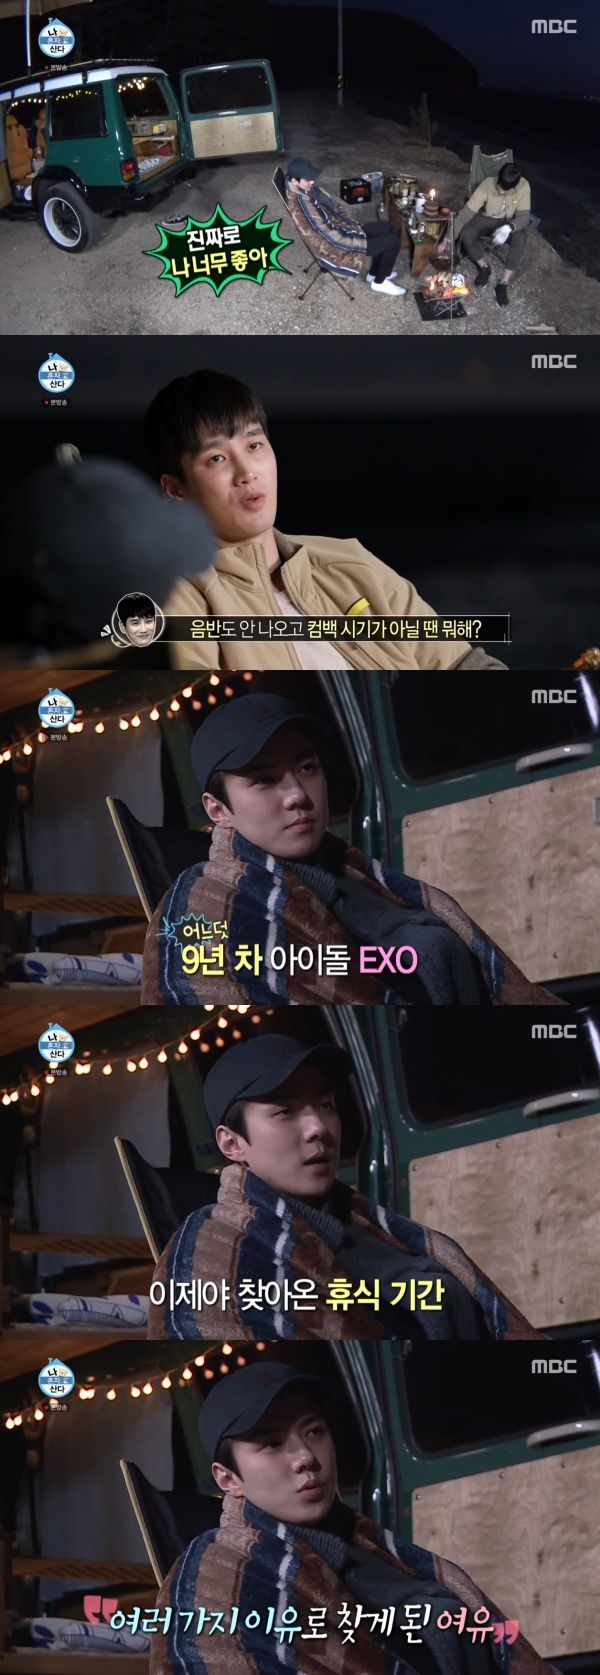 I live alone Sehun said that he has a rest period for the first time in nine years running to EXO.In the MBC entertainment program I Live Alone broadcasted on the 3rd, Actor Ahn Bo-hyuns daily life was revealed.On this day, Ahn Bo-hyun and Sehun enjoyed camping from sweet or coffee to drinking in a wooden soaked glass in the evening.In particular, the two of them also told a genuine story in the background of the sea.Its just at home all day, and its the same place when Im out, and its (Camping coming) so good, Sehun said in a later session of his first Camping.What do you do when you dont have a record and its not even a comeback time? Ahn Bo-hyun asked Sehun.In fact, were now nine years old, and weve been running without a break so far, Sehun said. Every year, the plan was all built up.Then, in 2020, we had a rest period; other members have troops and some older brothers to go to, so we are thinking with room now, he said.